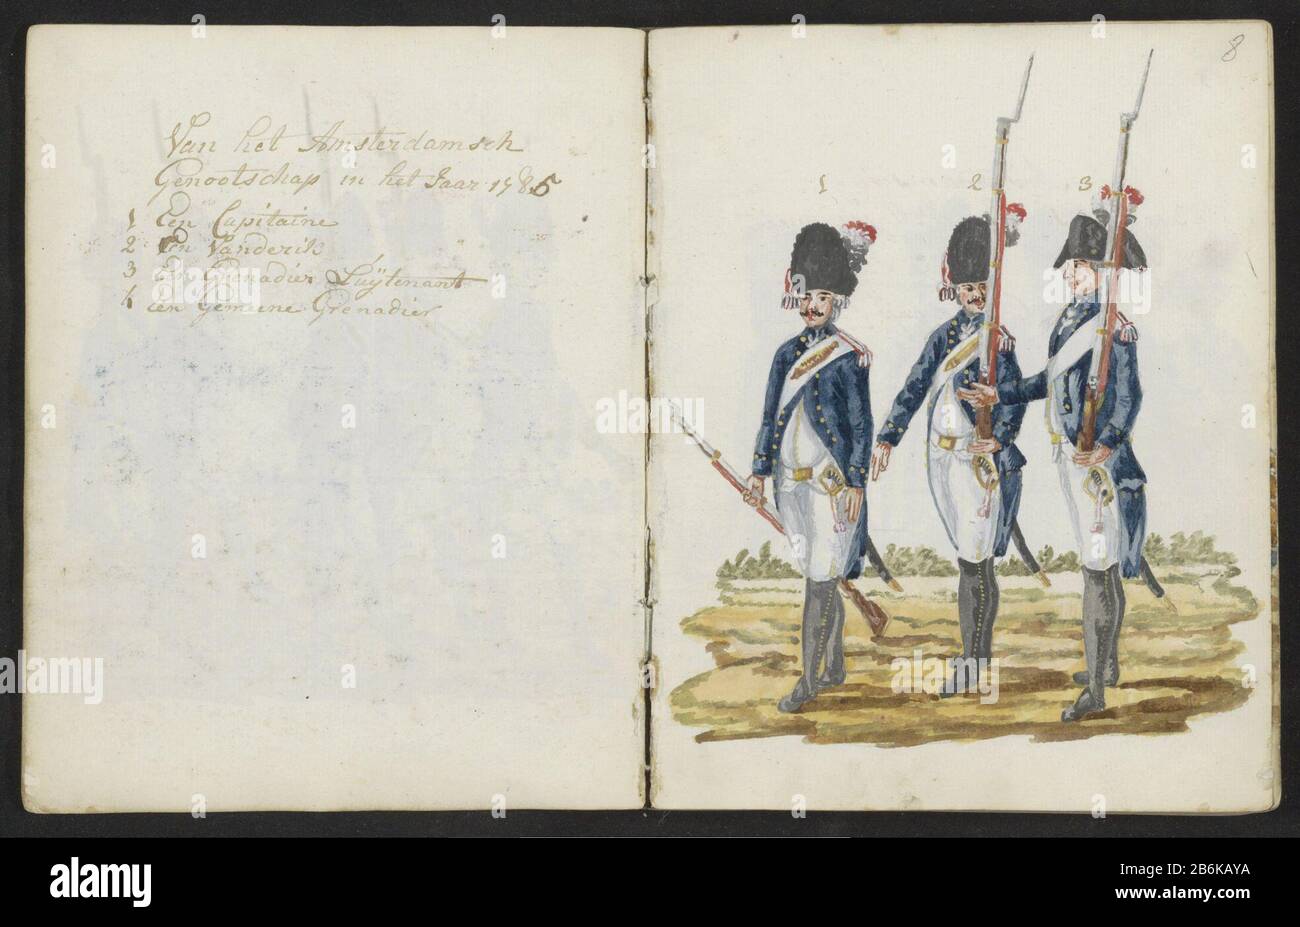 Three uniforms from the Amsterdam association exercise in 1783-1787 of the Amsterdam Society in the Year 1785 (title object) The page text with four shooters does not correlate with the page with the presentation of three members of the Amsterdam association exercise. Here's leaf torn from the album. Part of the second chapter on the new Amsterdam militia between 1783-1787. In the sketch with color drawings of the uniforms worn by military personnel and members of the schutterij from the period 1770 to 1795-1796. Manufacturer :  draftsman: S.G. Cast Insert preparation: Amsterdam Date: 1795 Phy Stock Photo